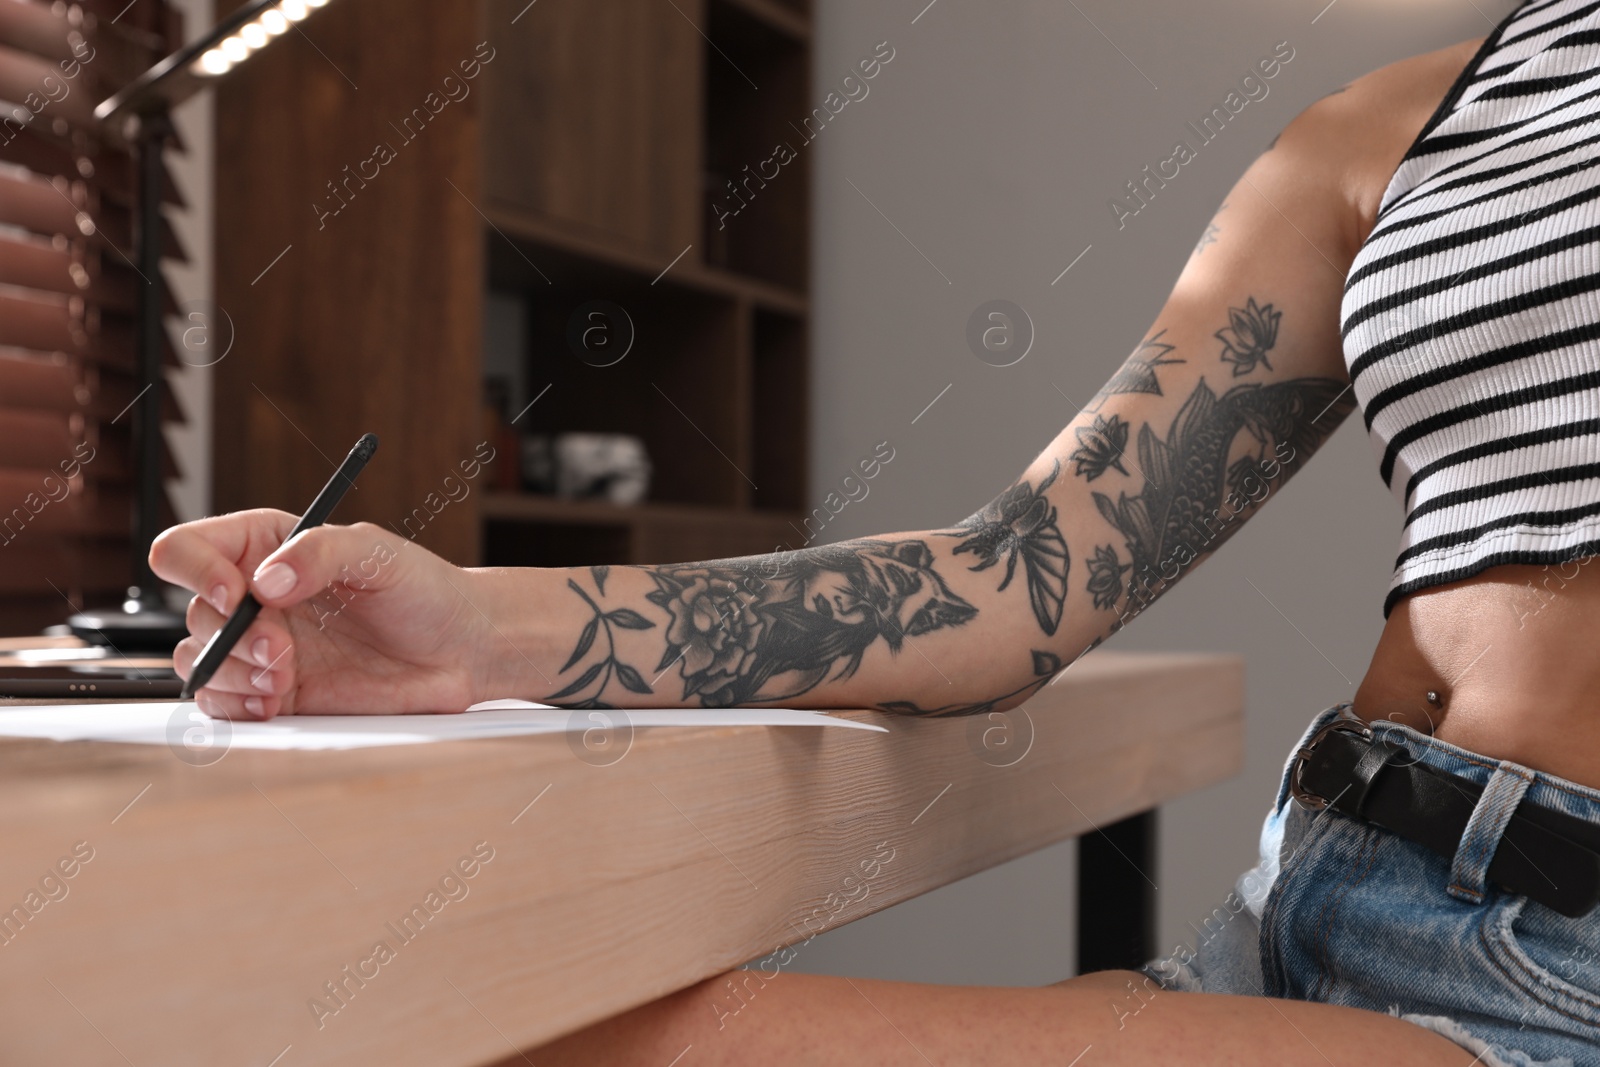 Photo of Woman with tattoos on arm drawing in sketchbook at table, closeup